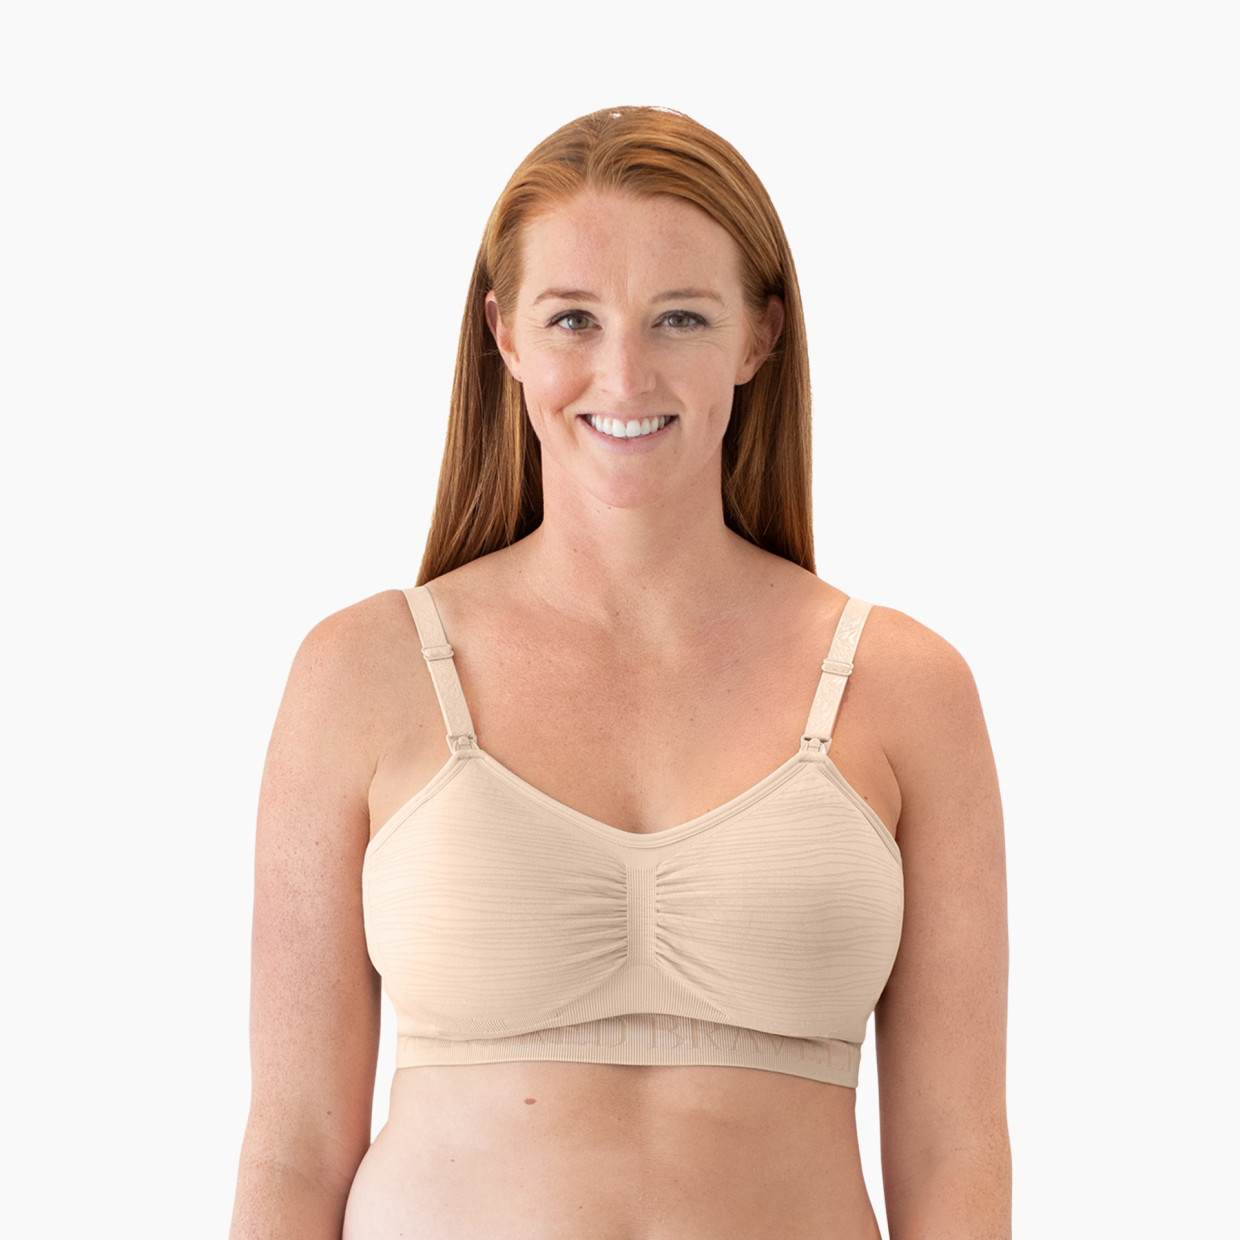 Kindred Bravely Sublime Hands Free Pumping Bra - Pink Heather, Xxx-Large.